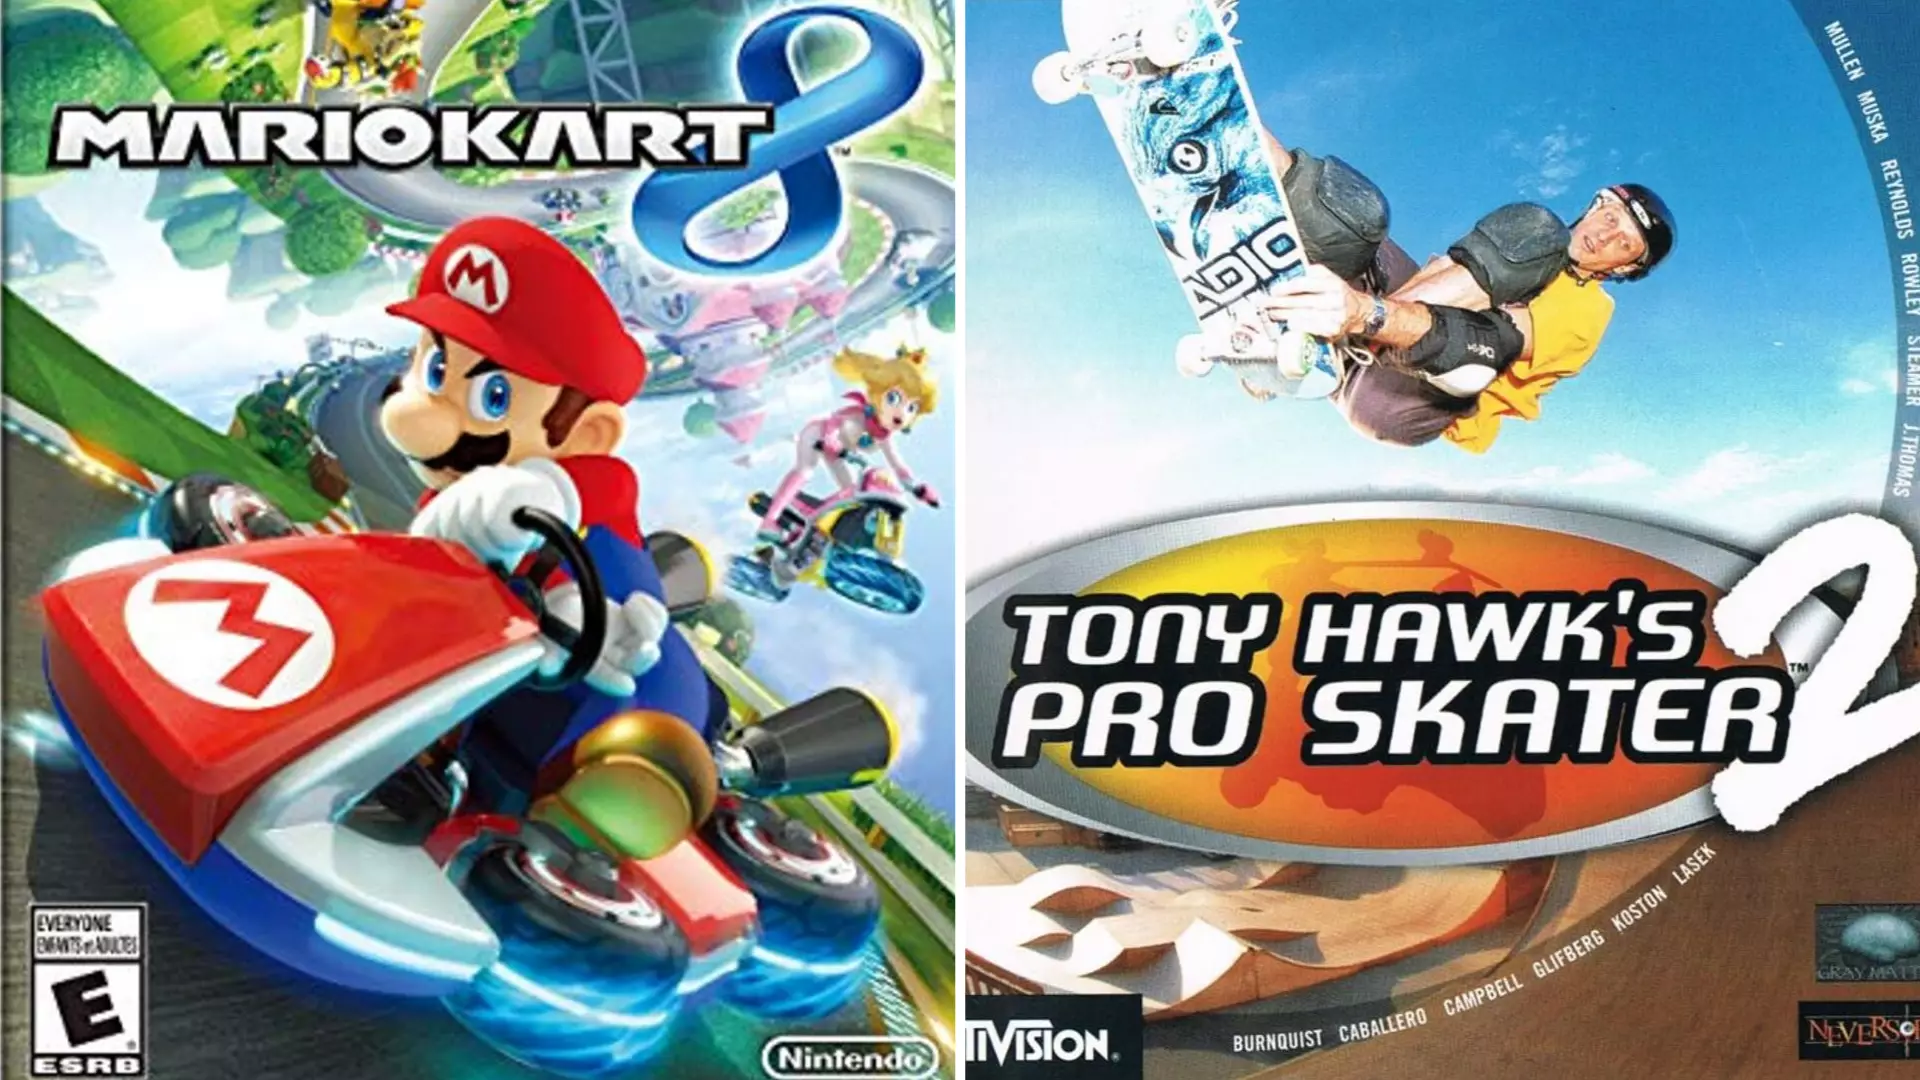 Tony Hawk’s Pro Skater 2 And Mario Kart 8 Feature In The Guardian’s ‘50 Best Games Of The 21st Century’